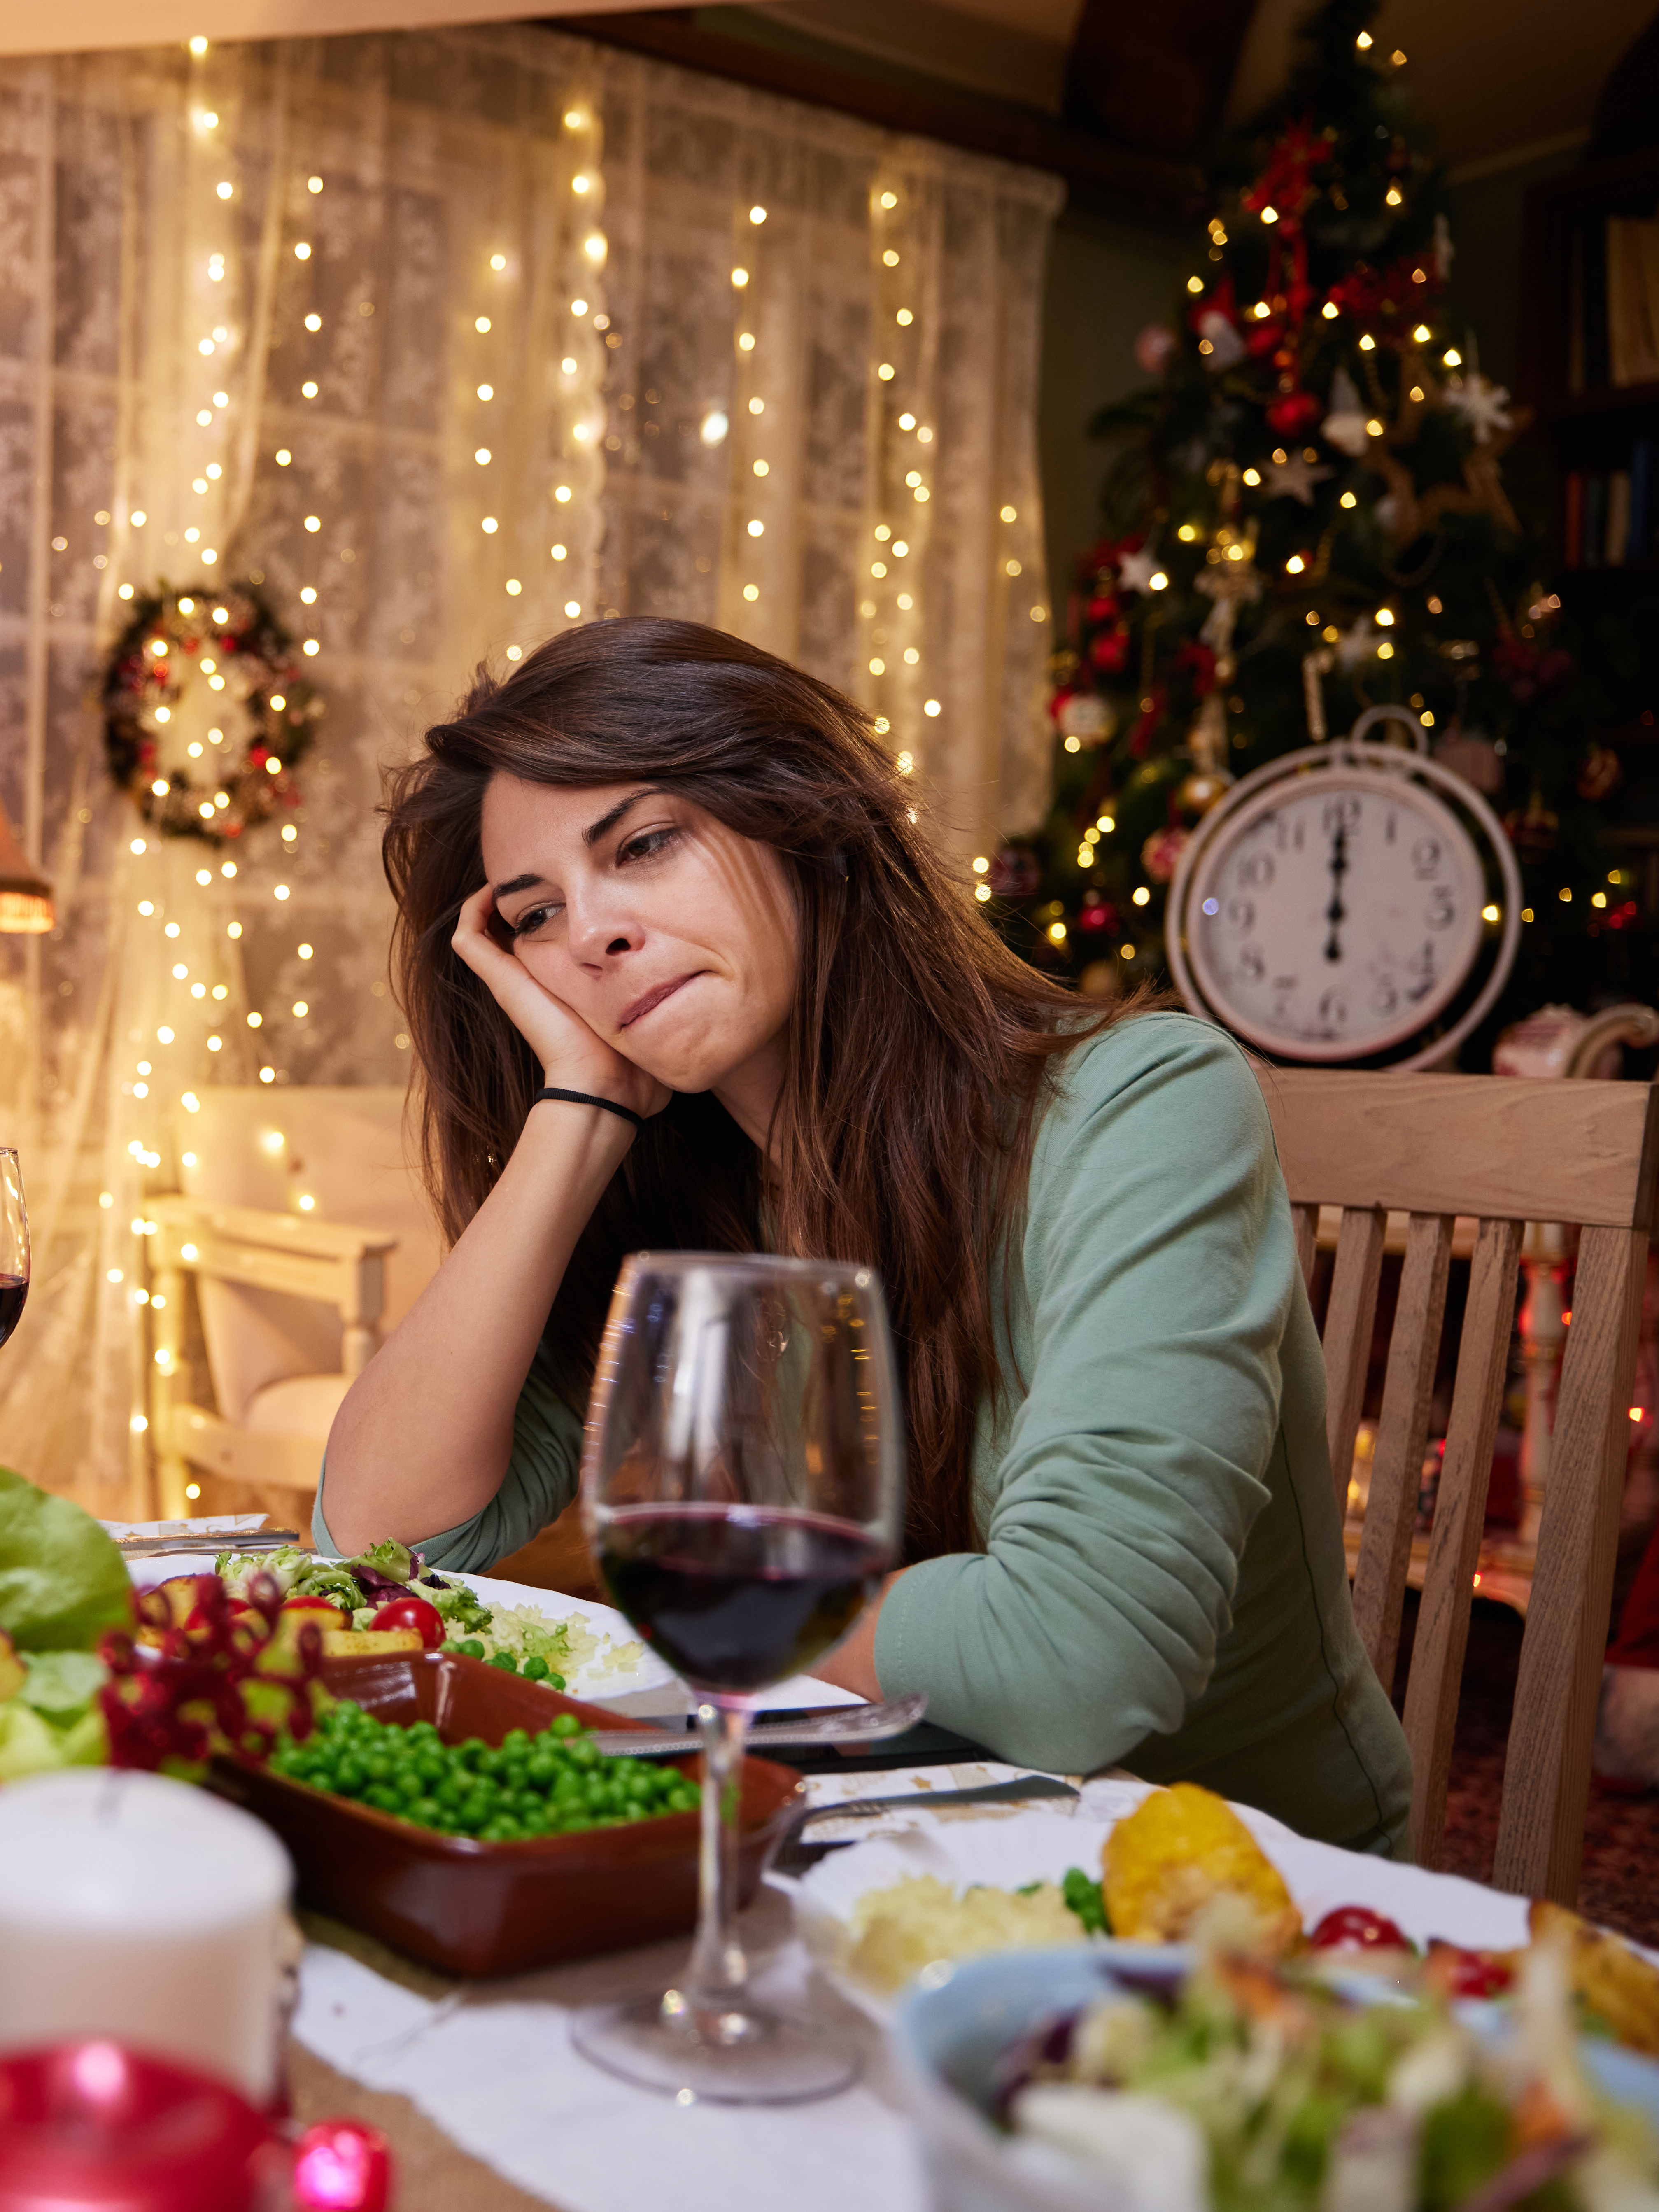 A sad woman sitting alone at a dining table on Christmas Eve | Source: Getty Images